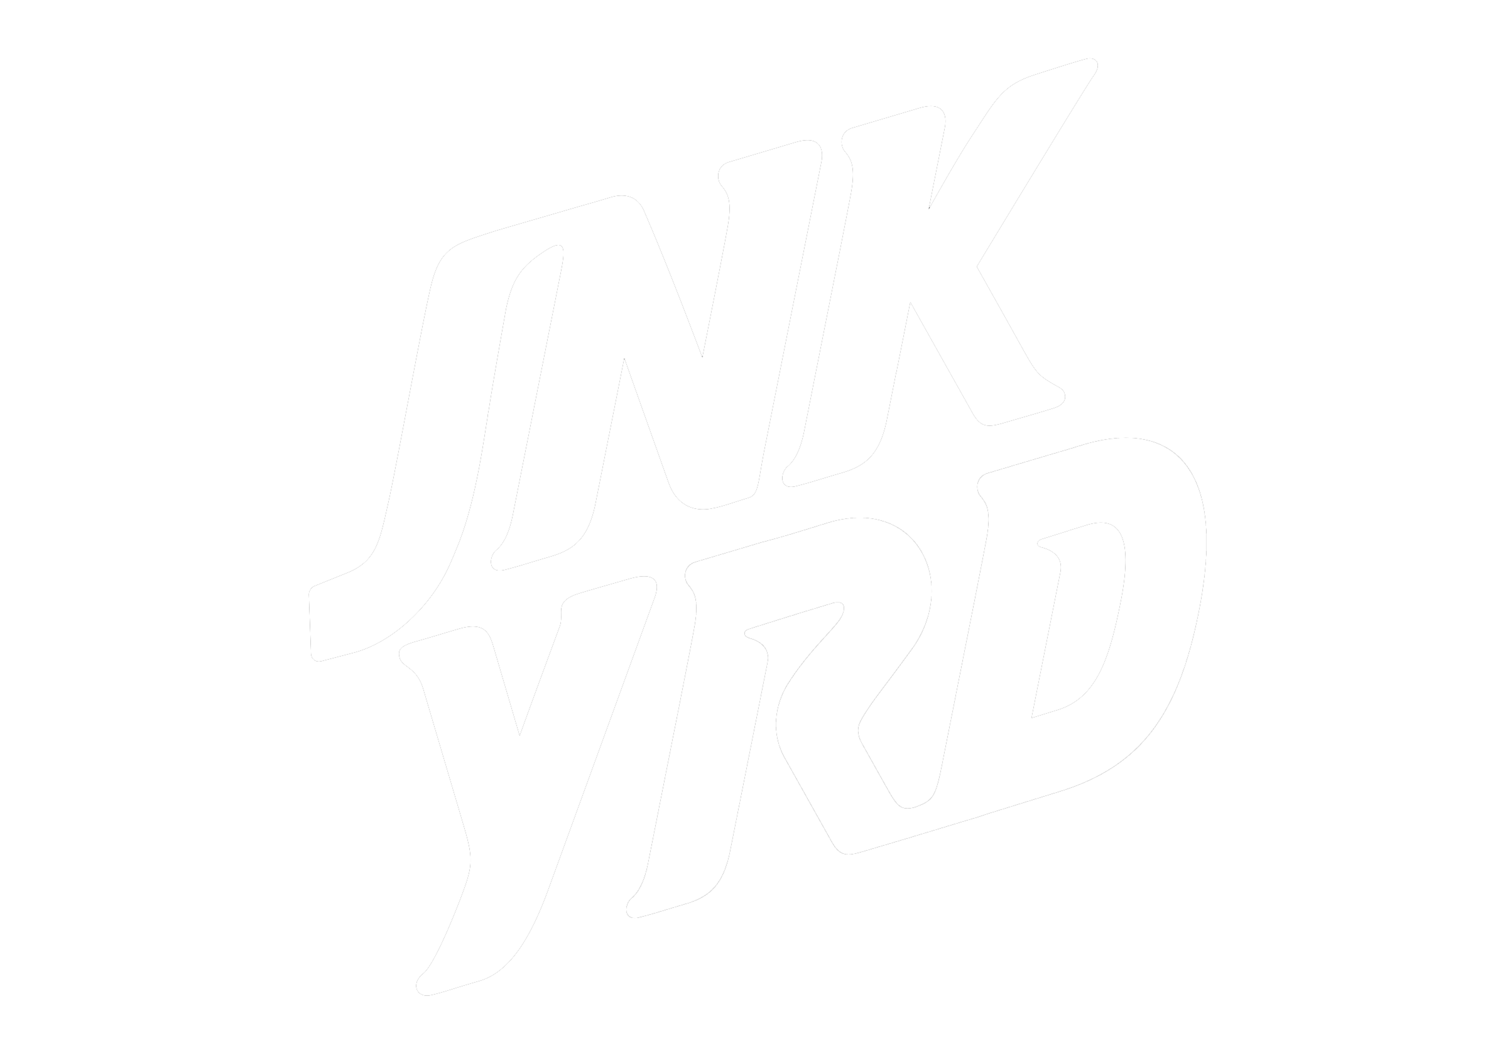 Jnkyrd Cinema Live Events and Storytelling